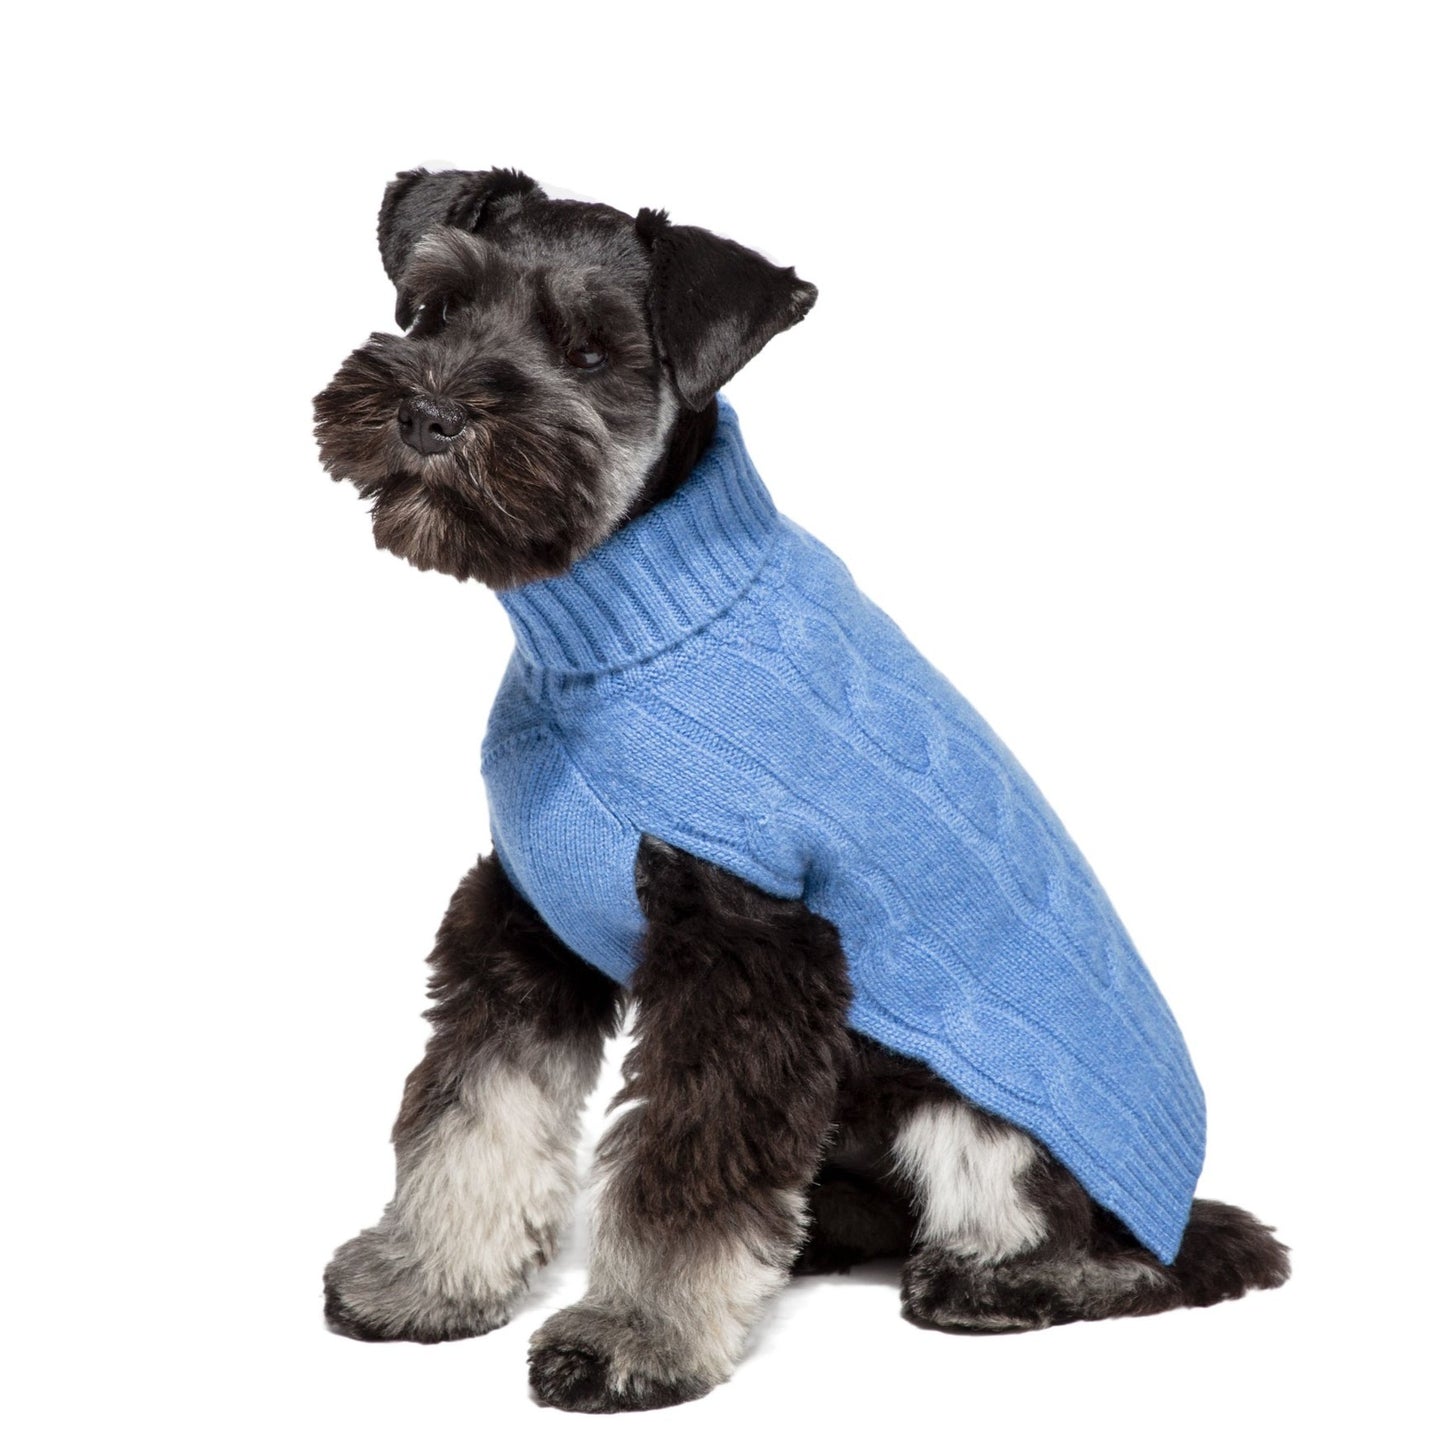 Cableknit Cashmere Dog Sweater, Navy